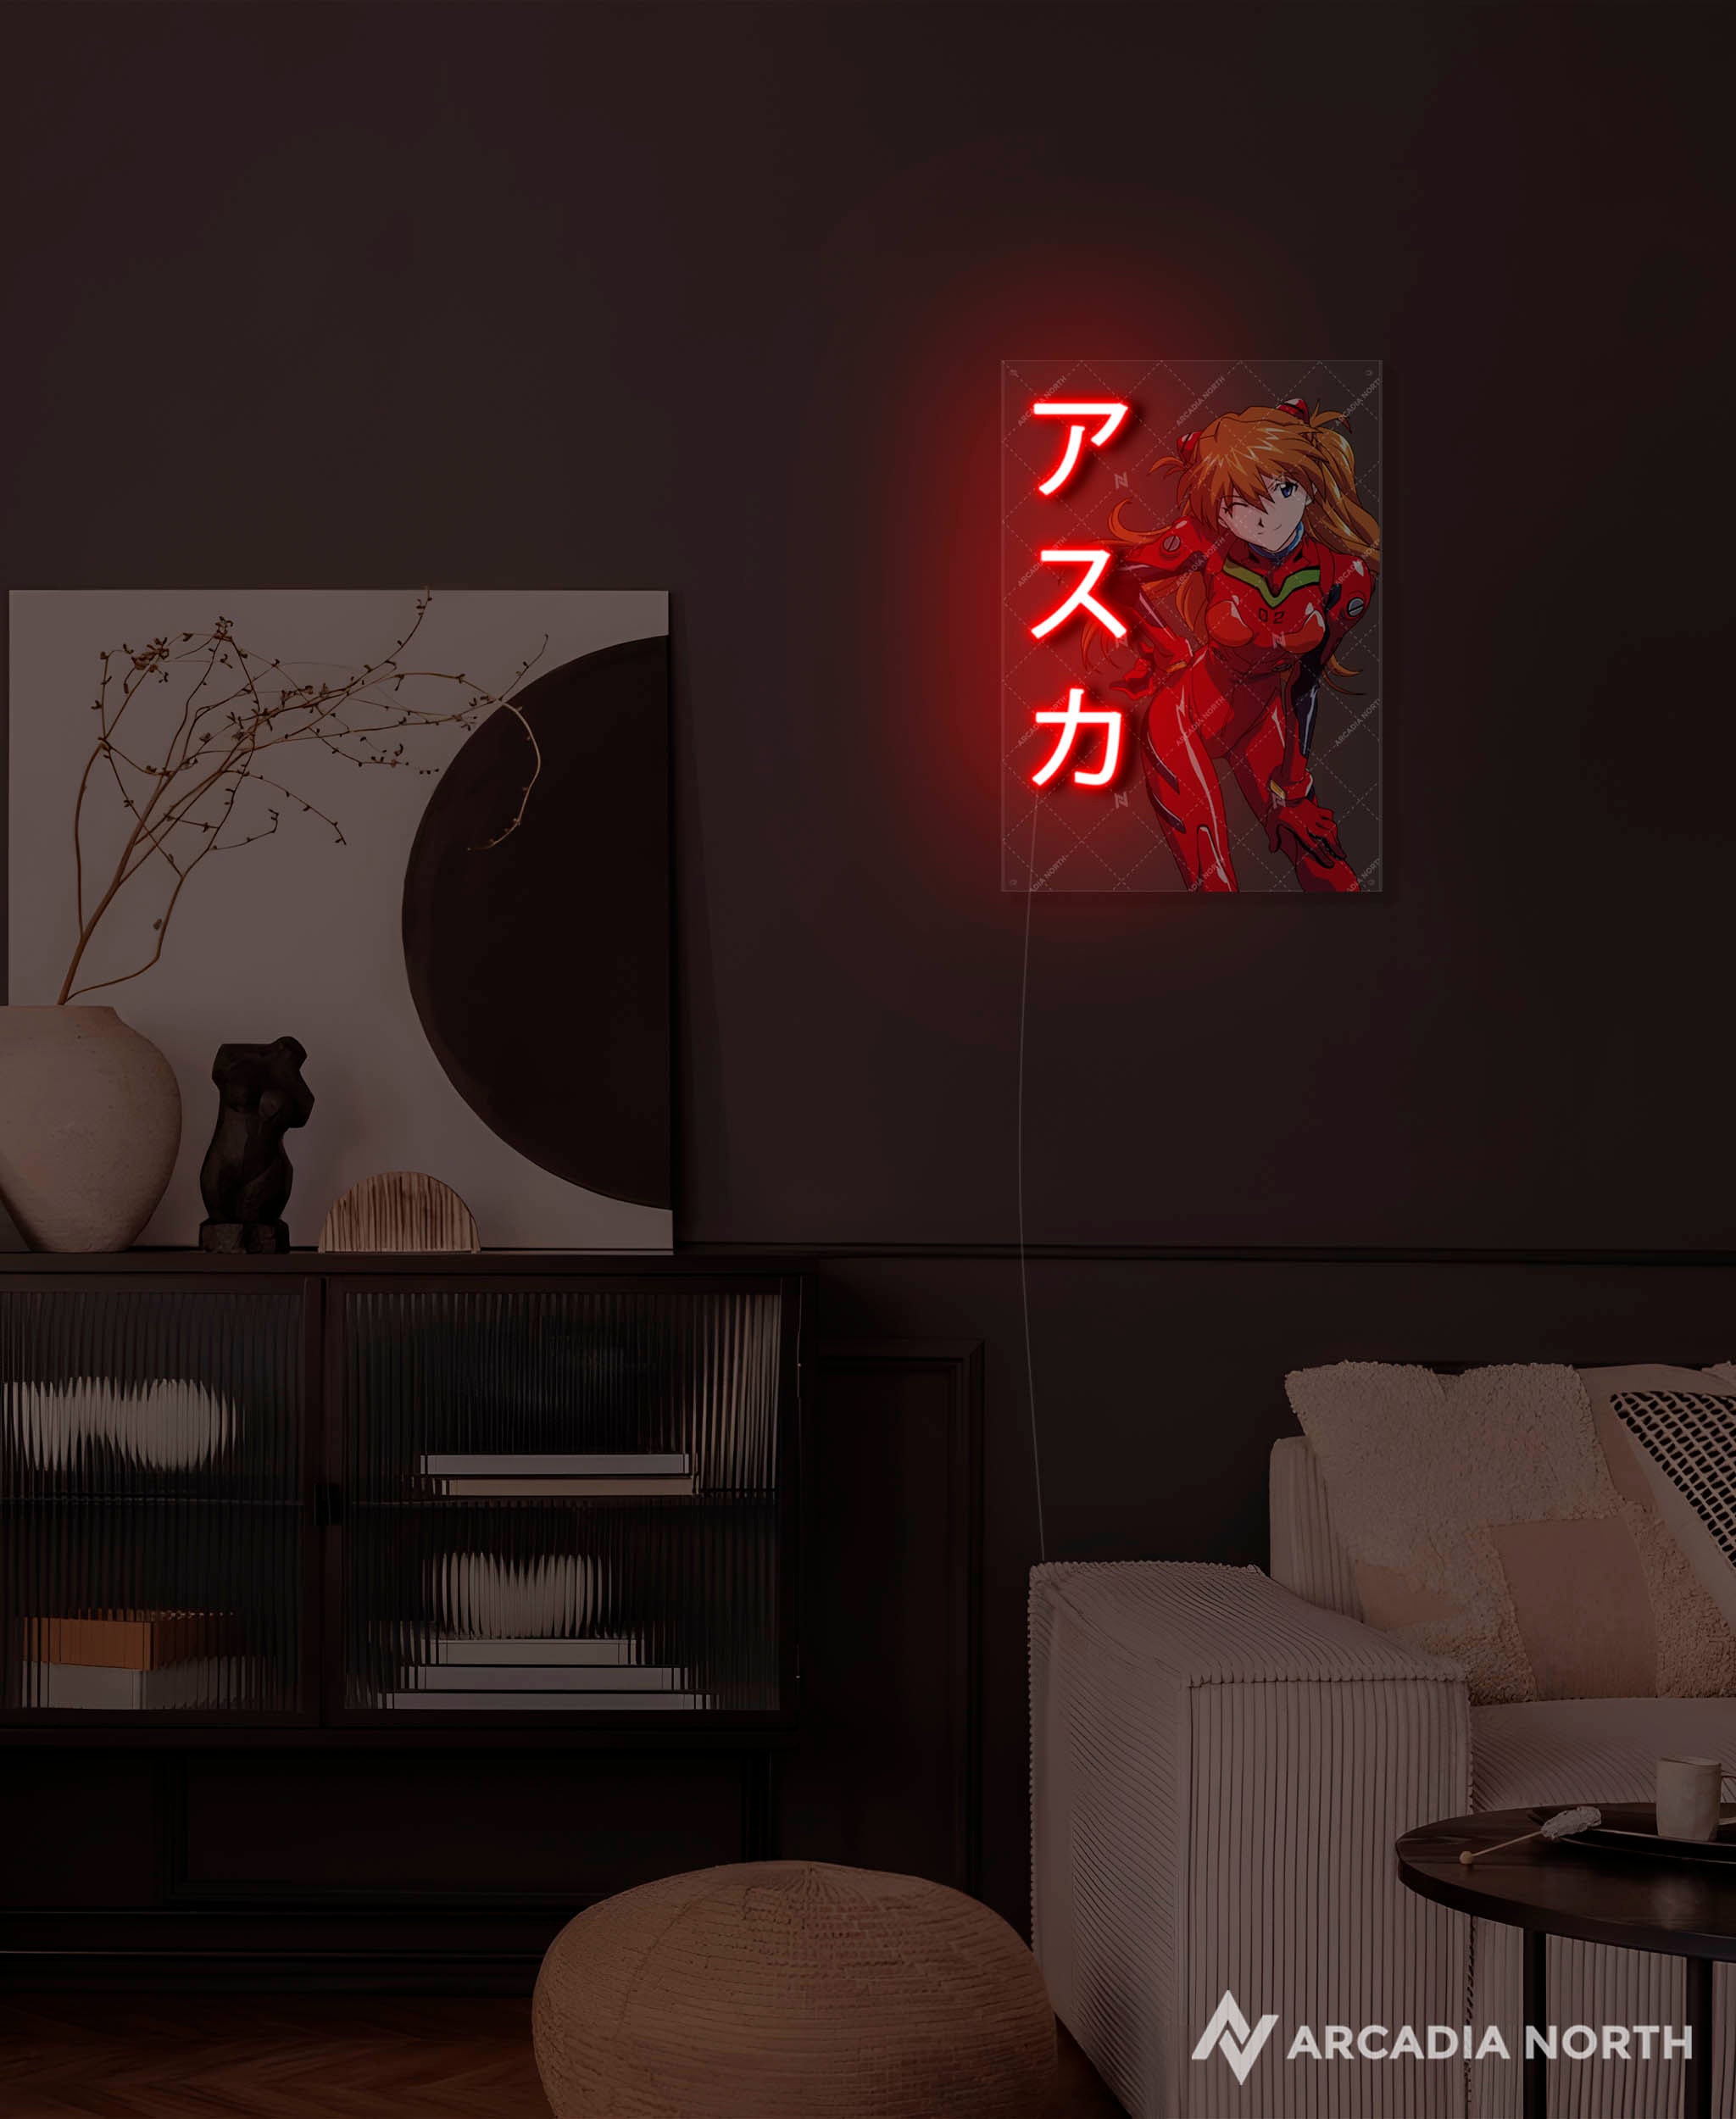 Arcadia North AURALIGHT - an LED Poster featuring the anime Neon Genesis Evangelion with Asuka Langley Soryu and her name Asuka written in Japanese Katakana. Illuminated by glowing neon LED lights. UV-printed on acrylic.